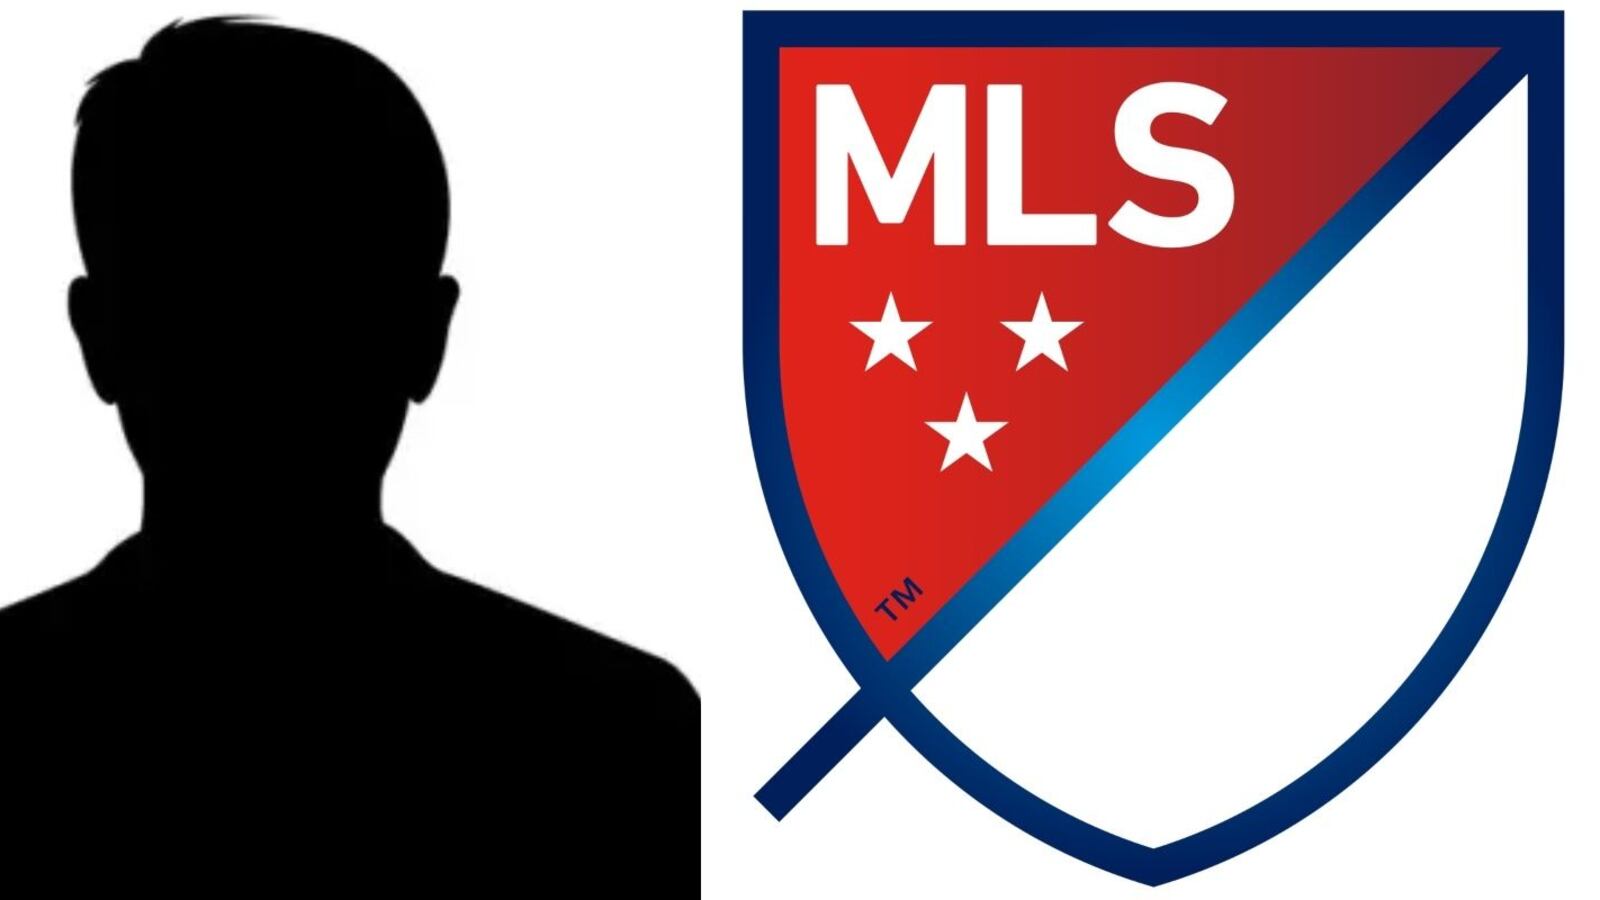 The new star player looking to hire the MLS